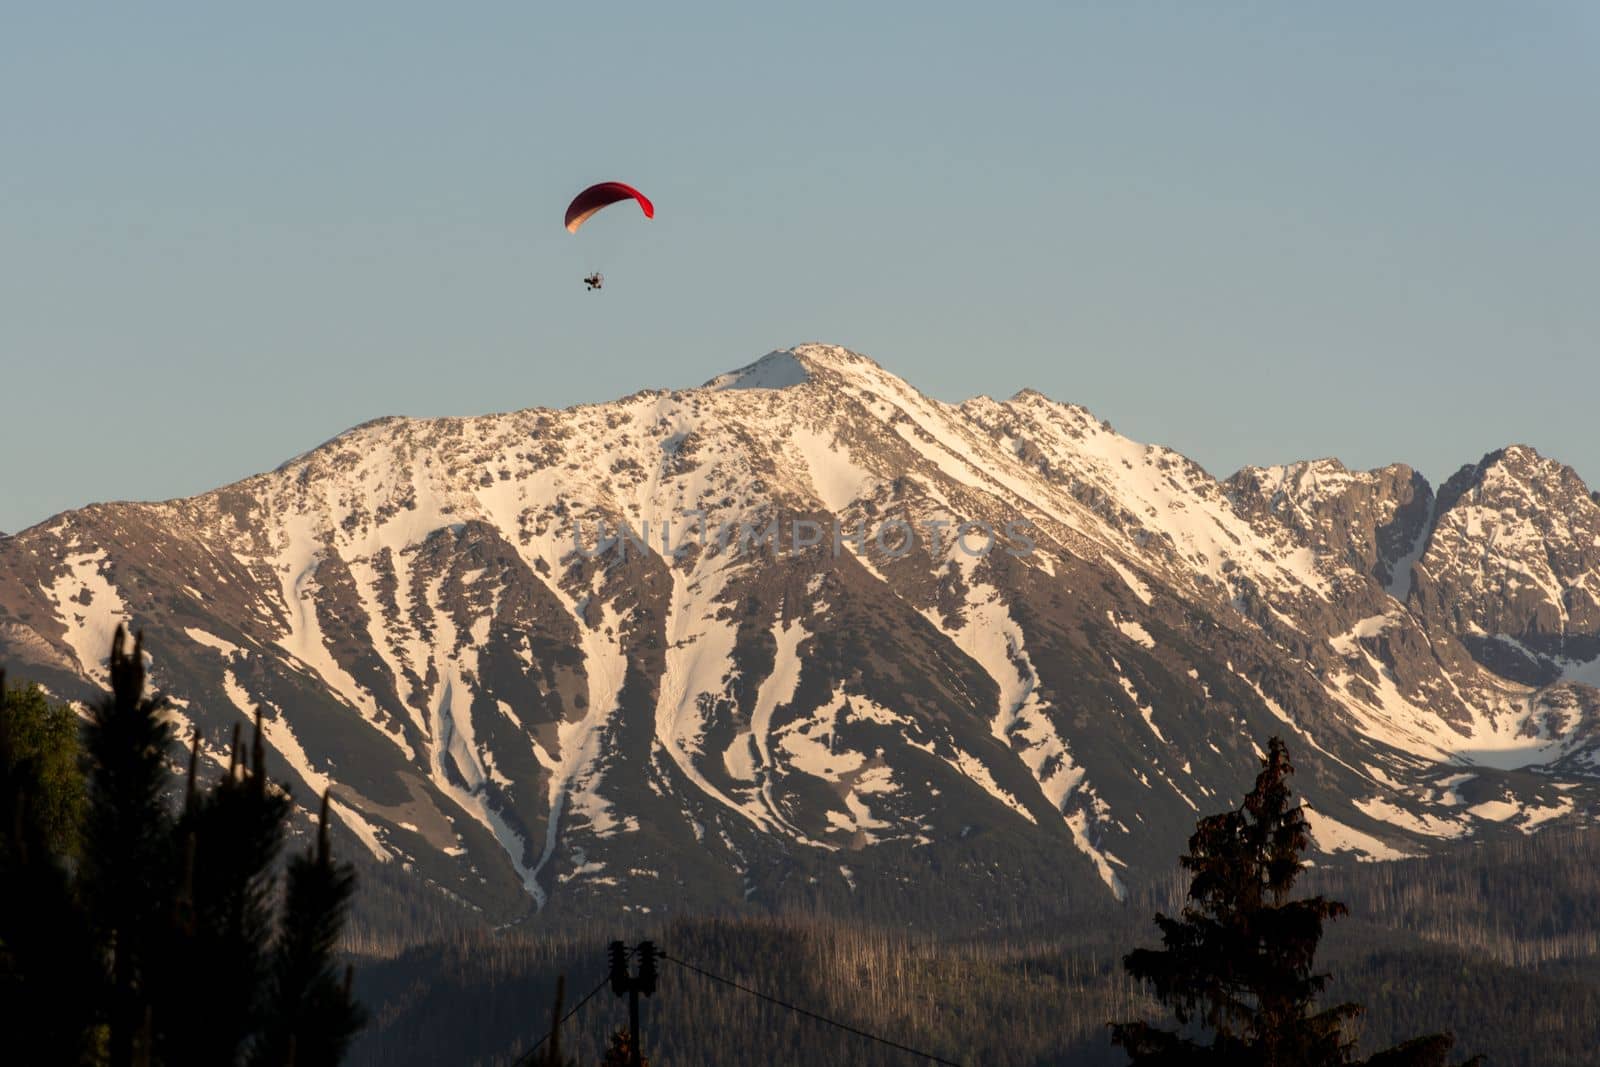 Tatra Mountains covered in snow with a paraglider. Panoramic view. by scasal15